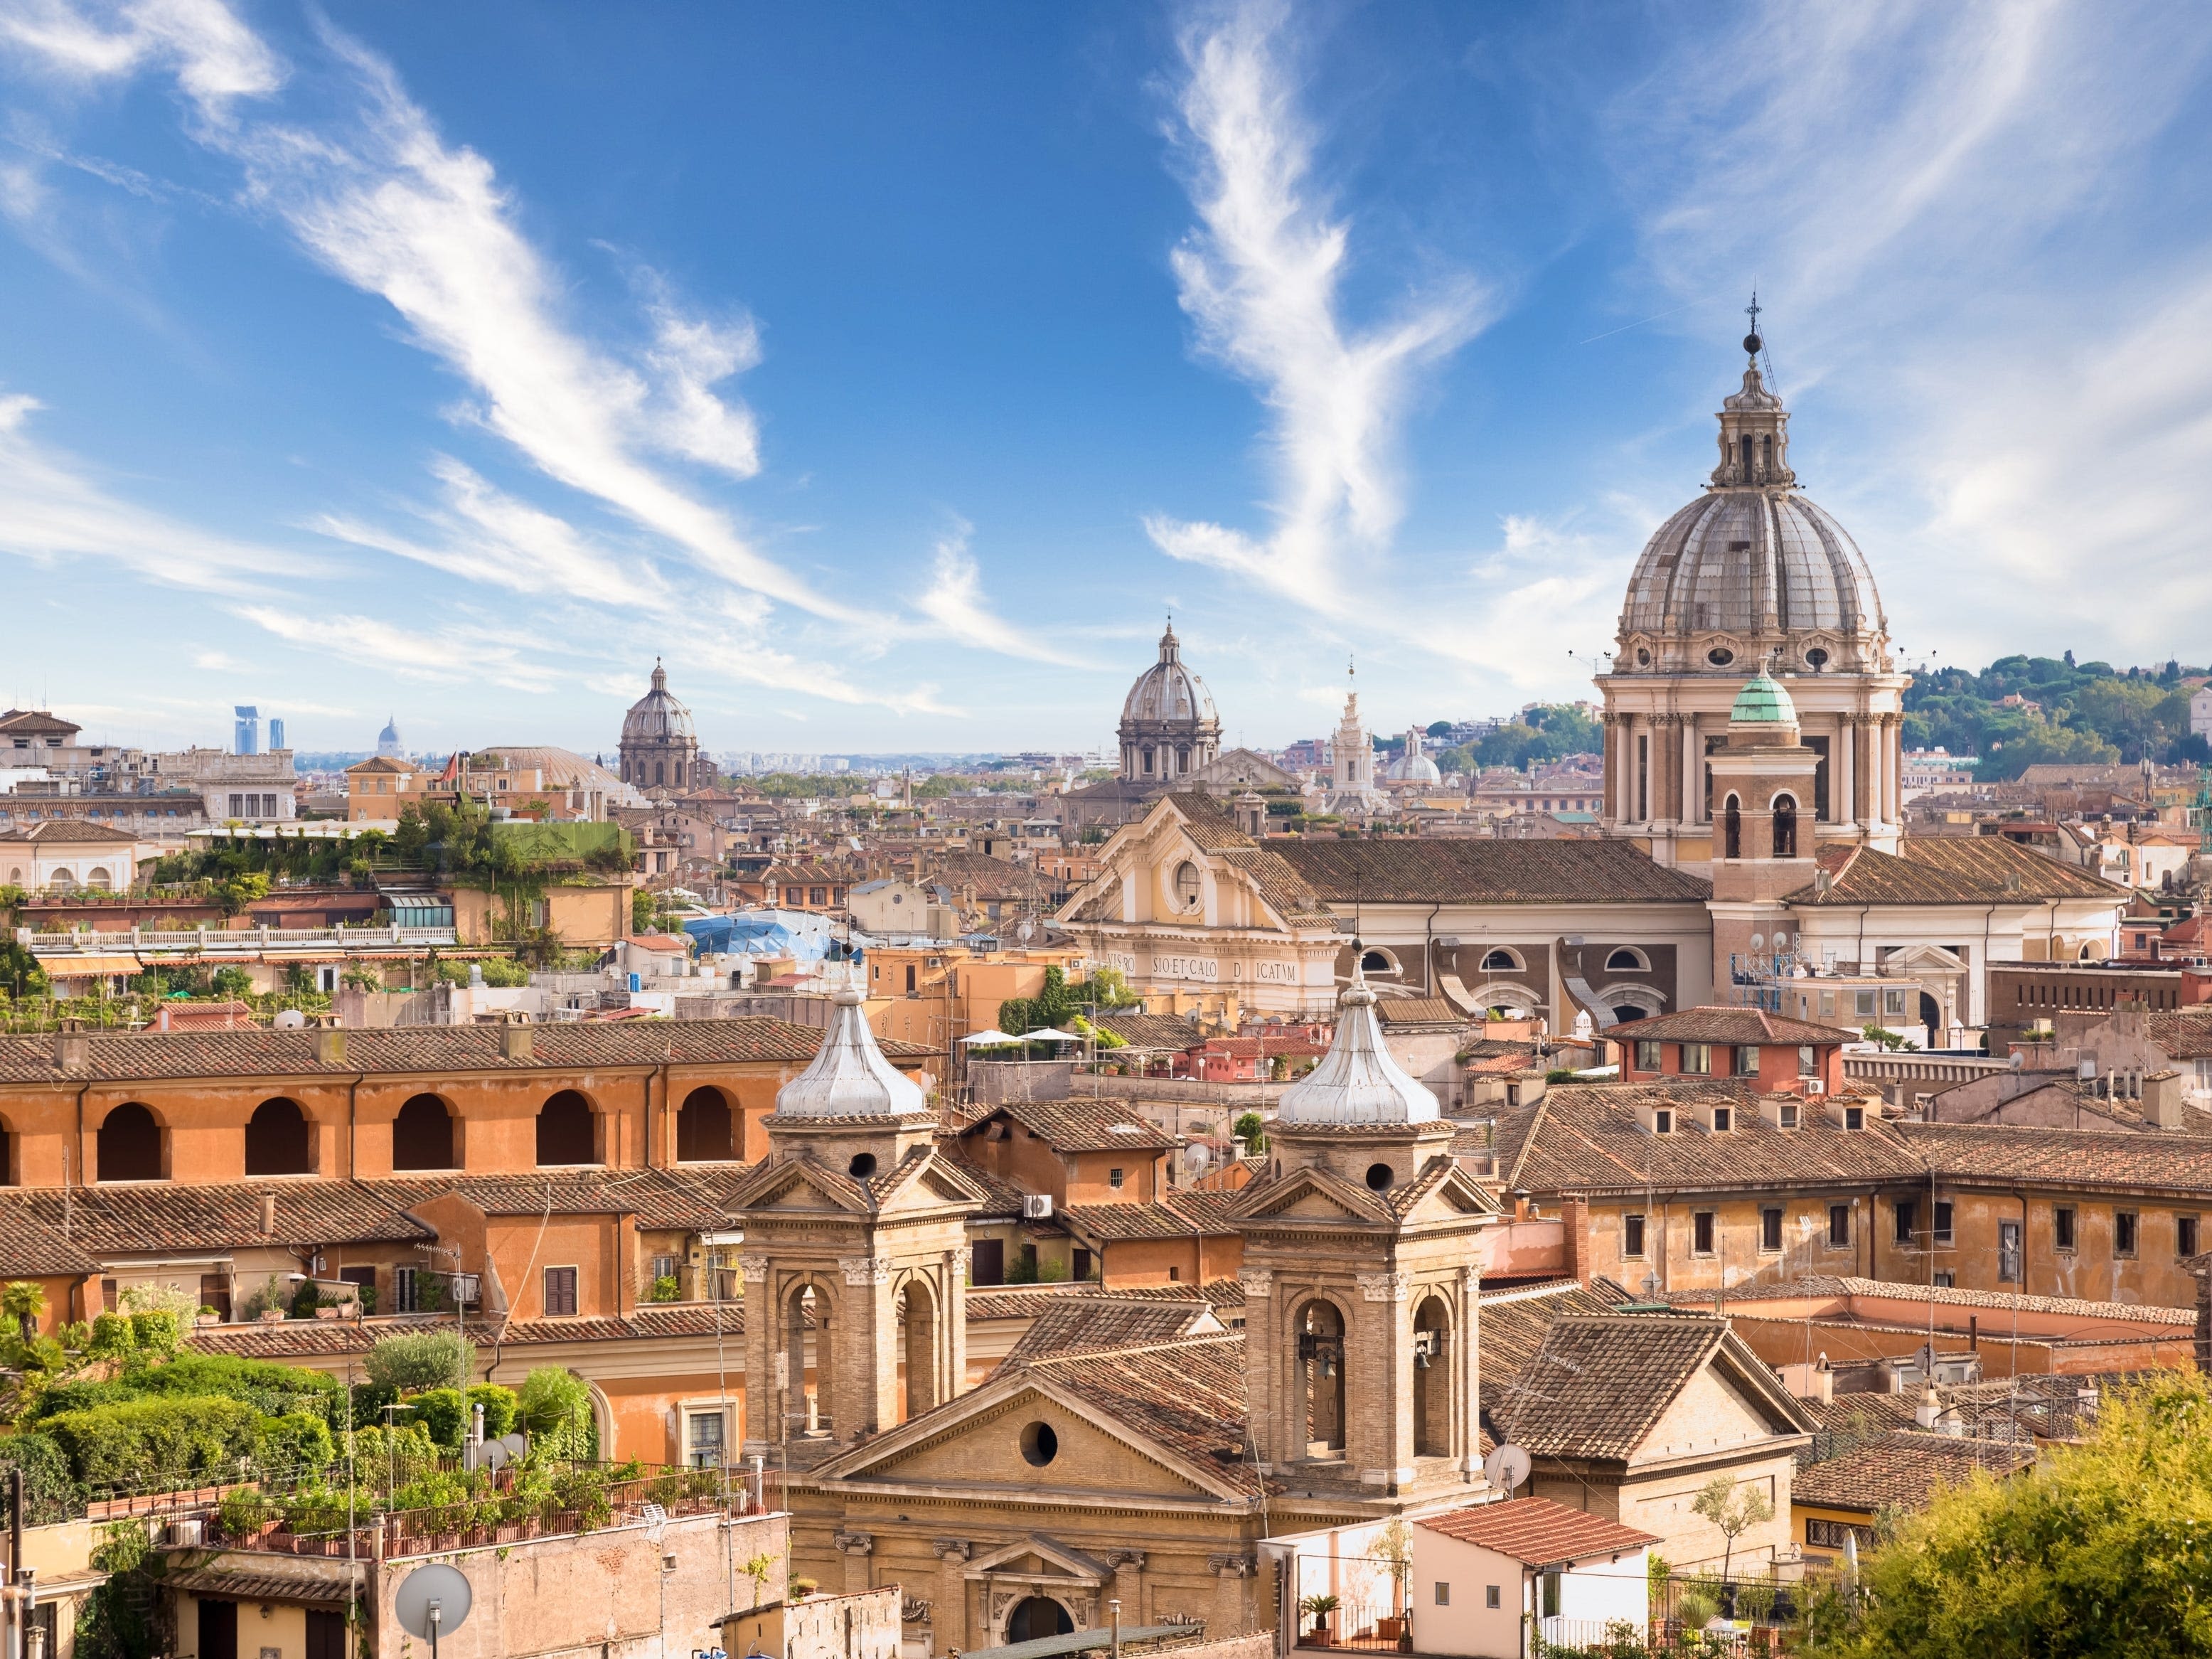 I've been a tour guide in Rome for 16 years. Here are 5 tourist attractions that are worth it and 5 you can skip.